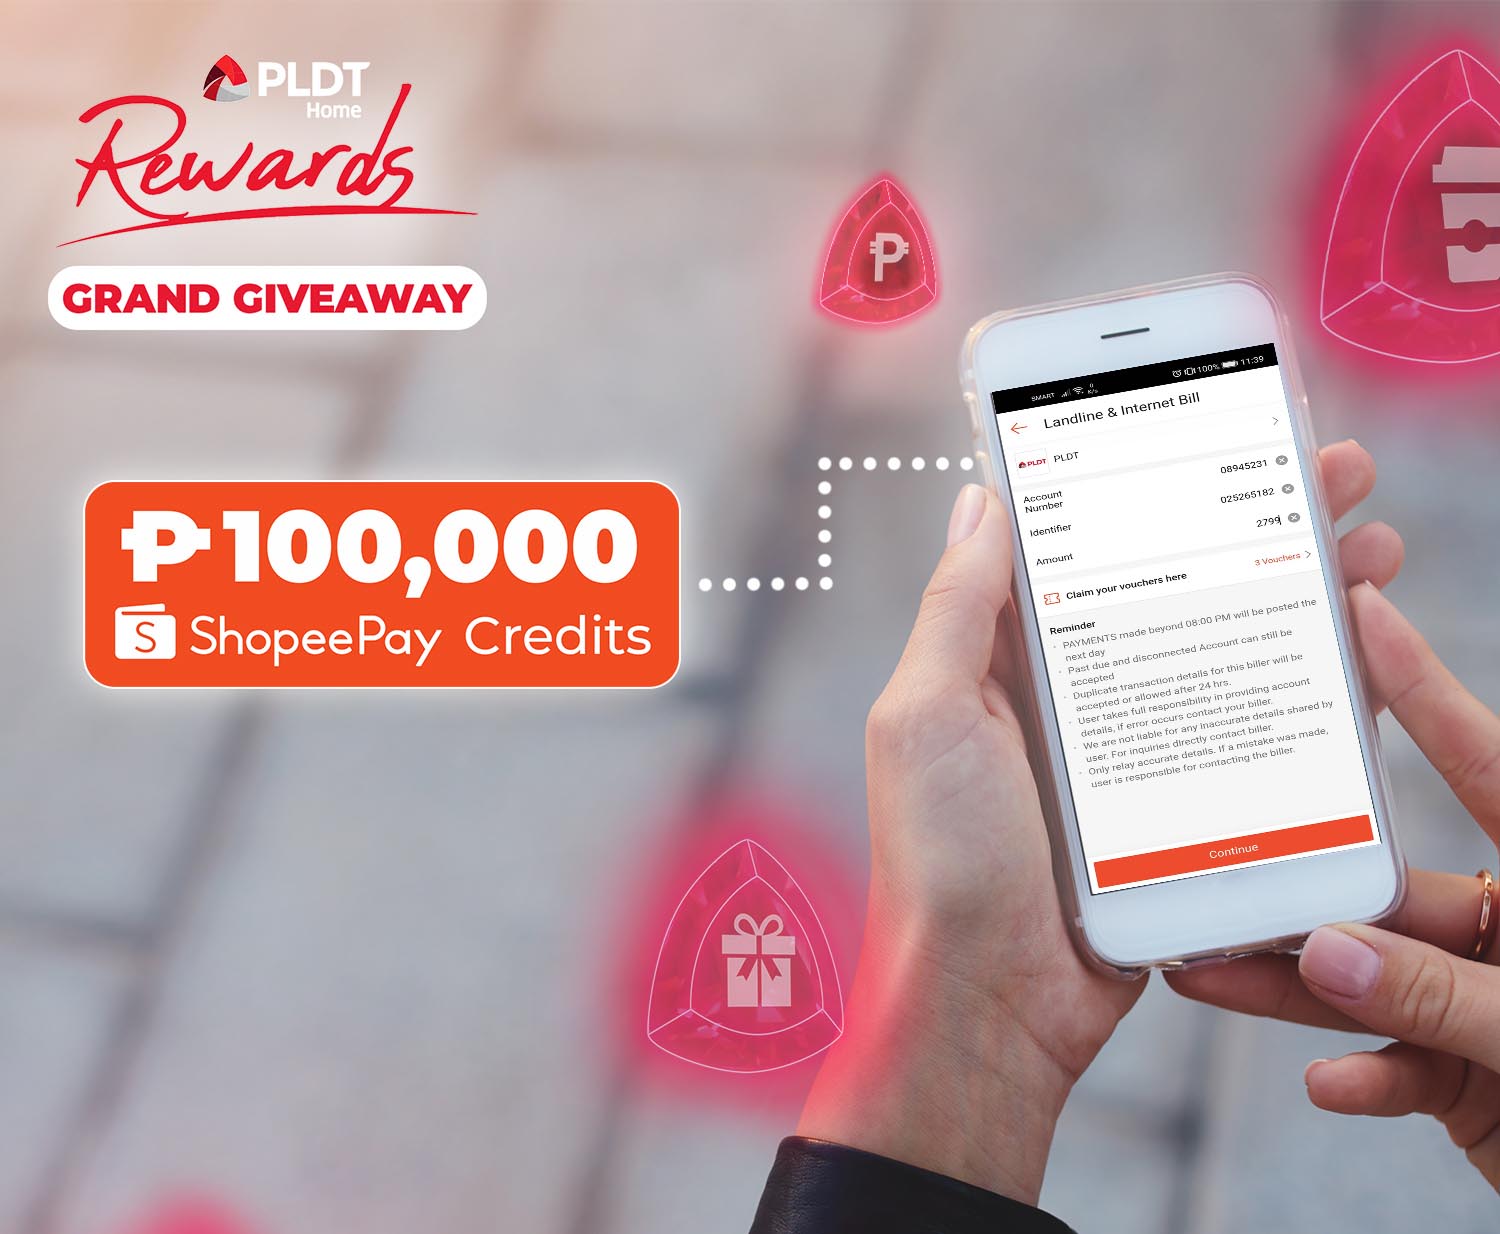 PHP1 million worth of ShopeePay credits and tons of prizes up for grabs on PLDT Home Rewards Grand Giveaway monthly draw!